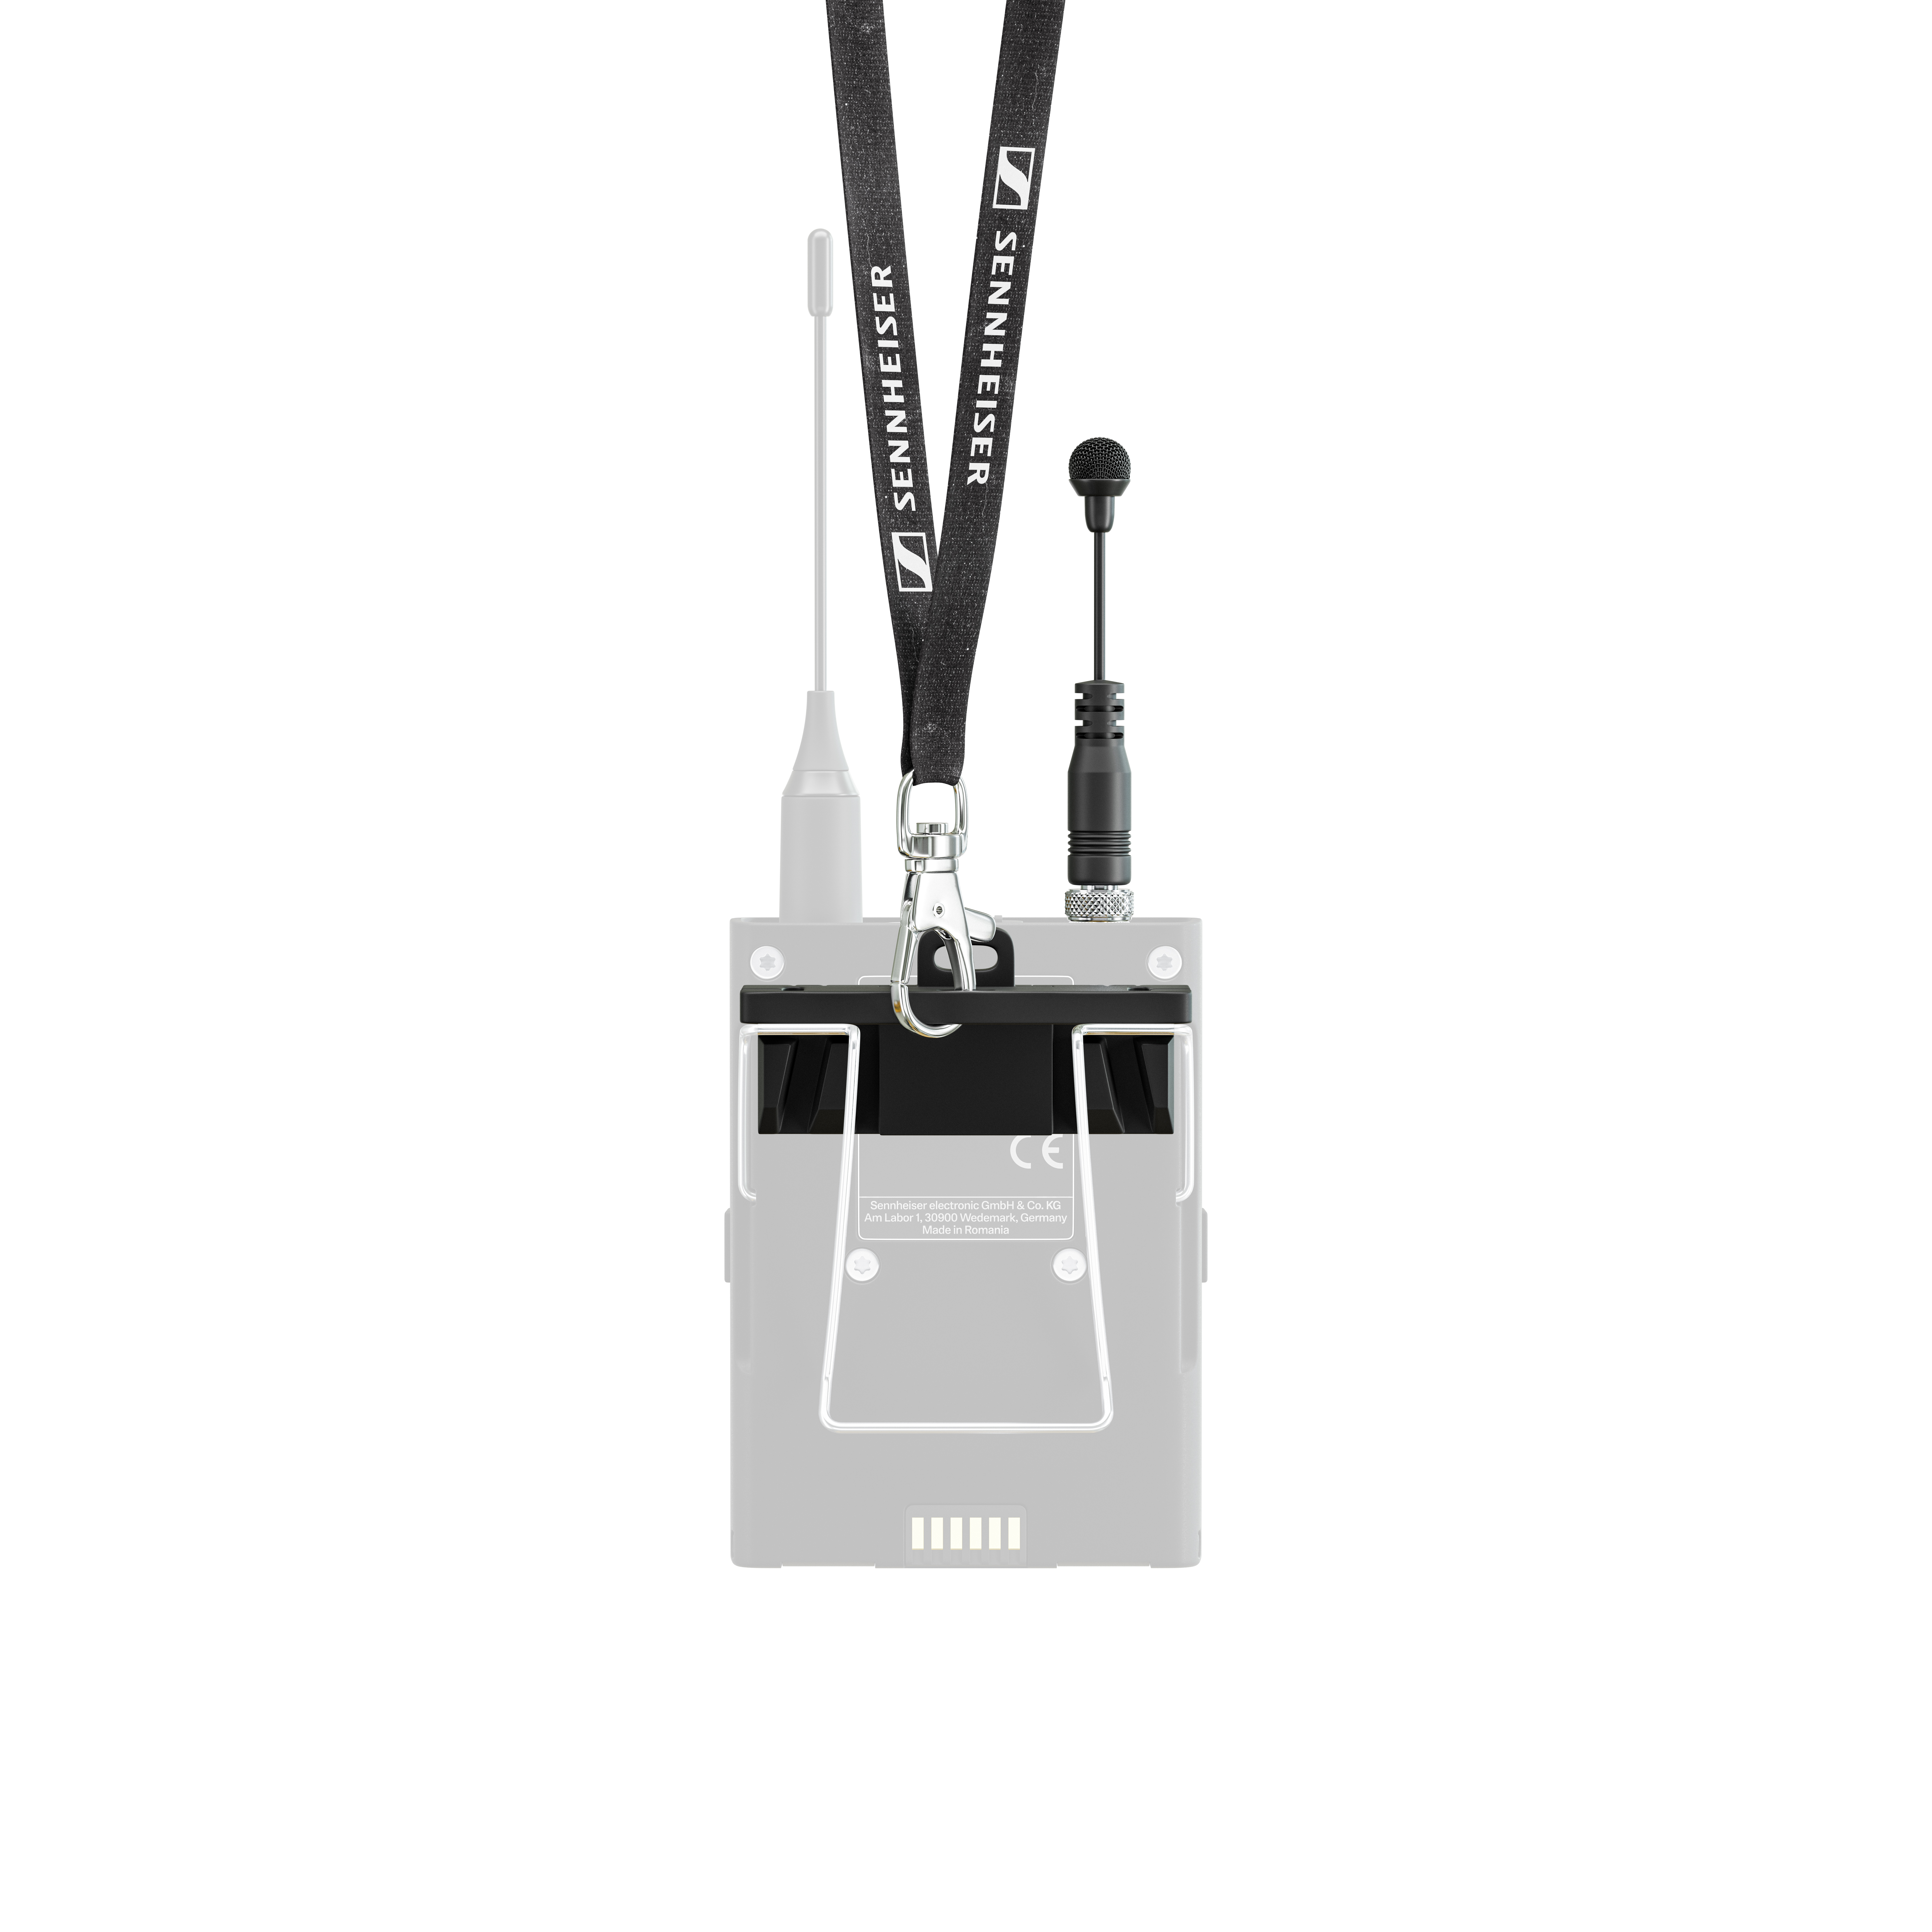 With MKE mini, mic-up for users gets as easy as putting on a lanyard with a conference badge.